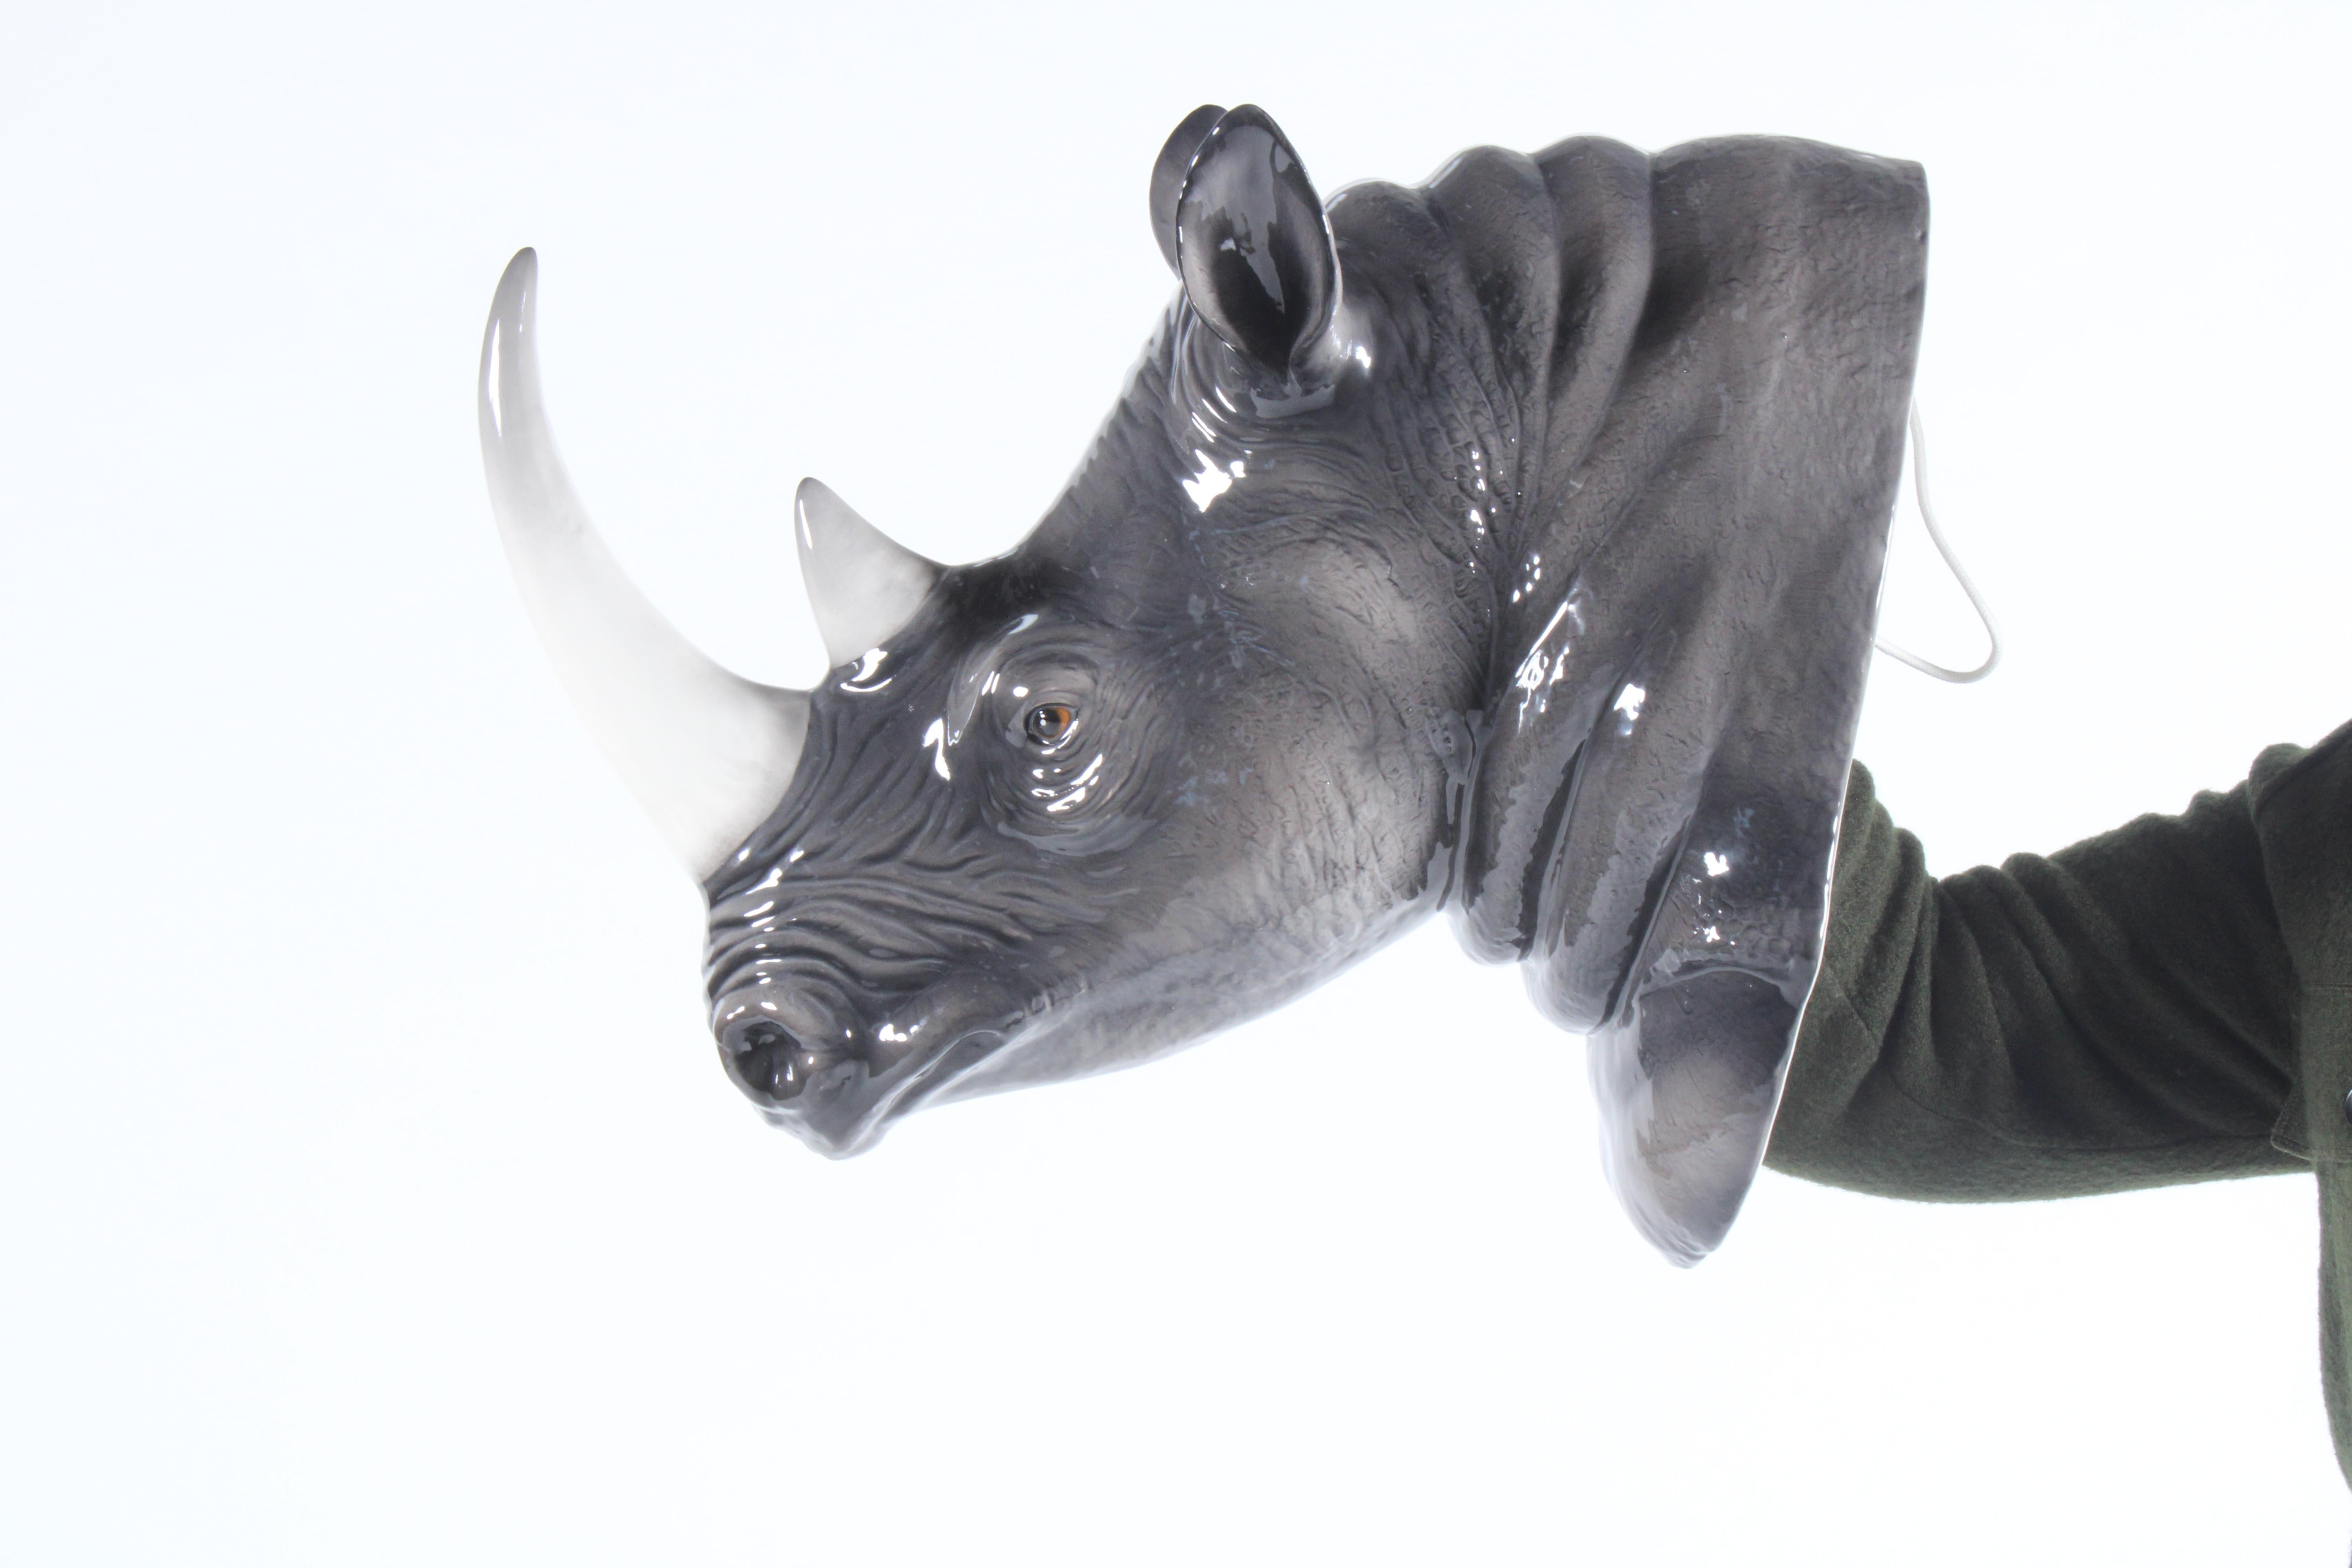 Stunning vintage Italian ceramic bust of a rhino. This charming and delightful sculpture is a real work of art and is extremely realistic. Made in Bassano Italy it boasts fabulous detailing and is made to the highest standards of craftsmanship. It